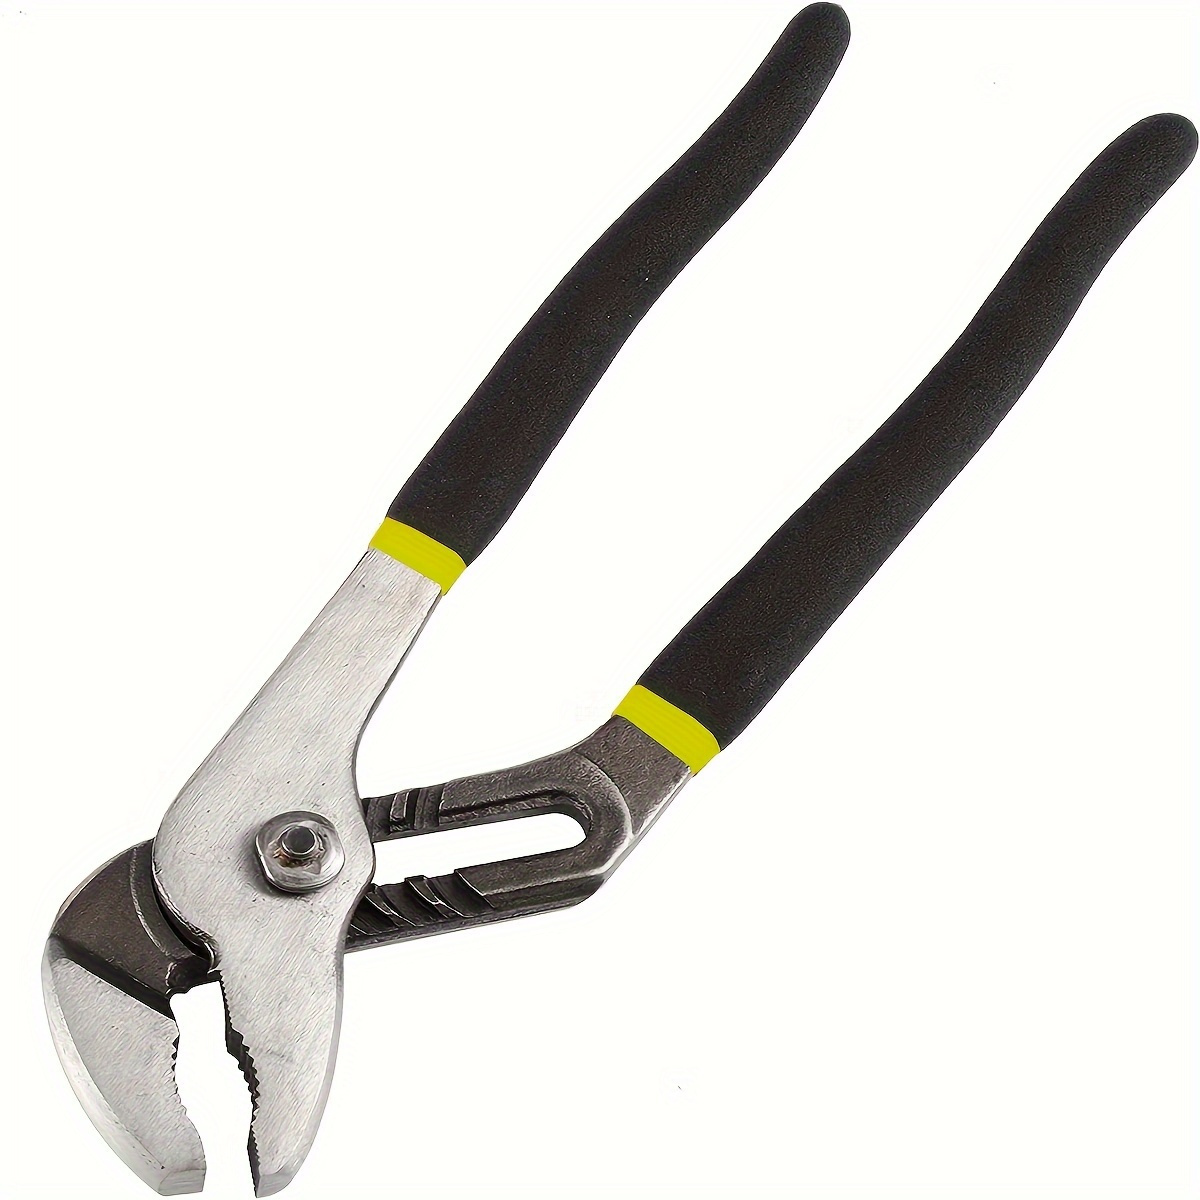 Stedi 5-Inch Needle Nose Pliers for Jewelry Making, Chain Nose Pliers with Precision Non-Serrated Jaws for Jewelry Repair, Bending, Gripping, Women's